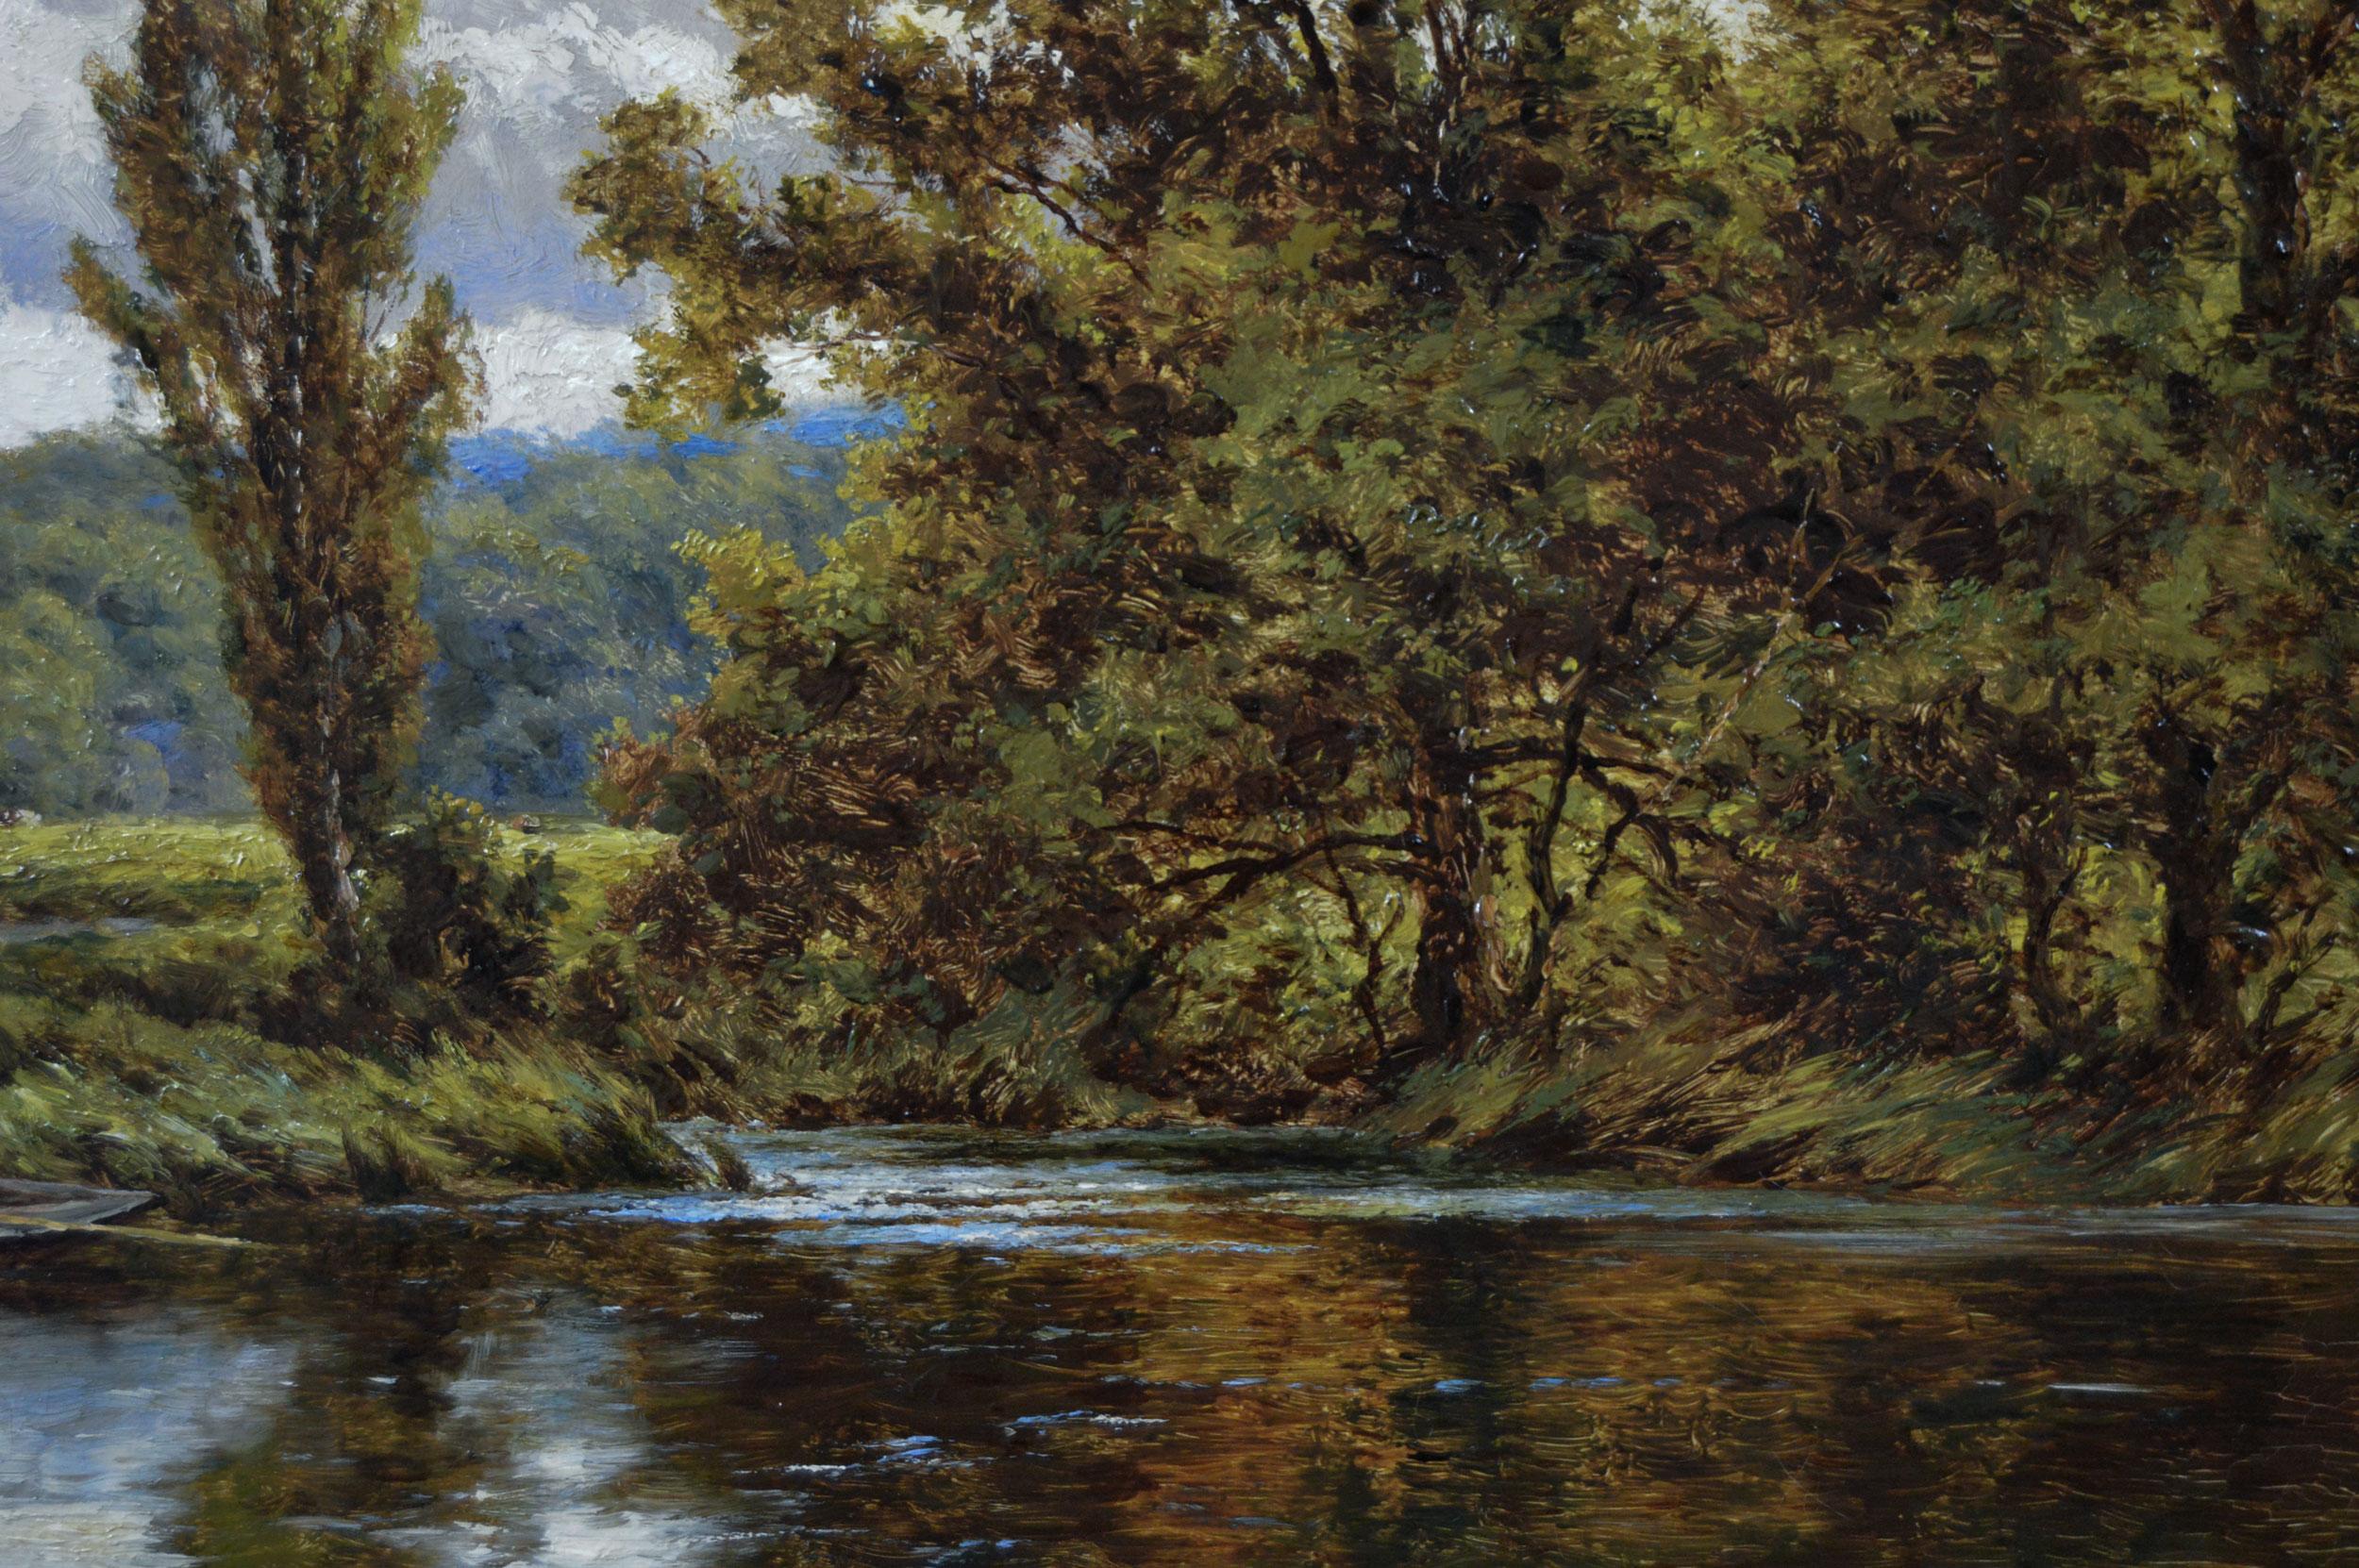 Henry H Parker 
British, (1858-1930)
A Bend in the River near Pangbourne
Oil on canvas, signed & further inscribed verso
Image size: 19.25 inches x 29.25 inches 
Size including frame: 26.75 inches x 36.75 inches

A tranquil view of the river Thames